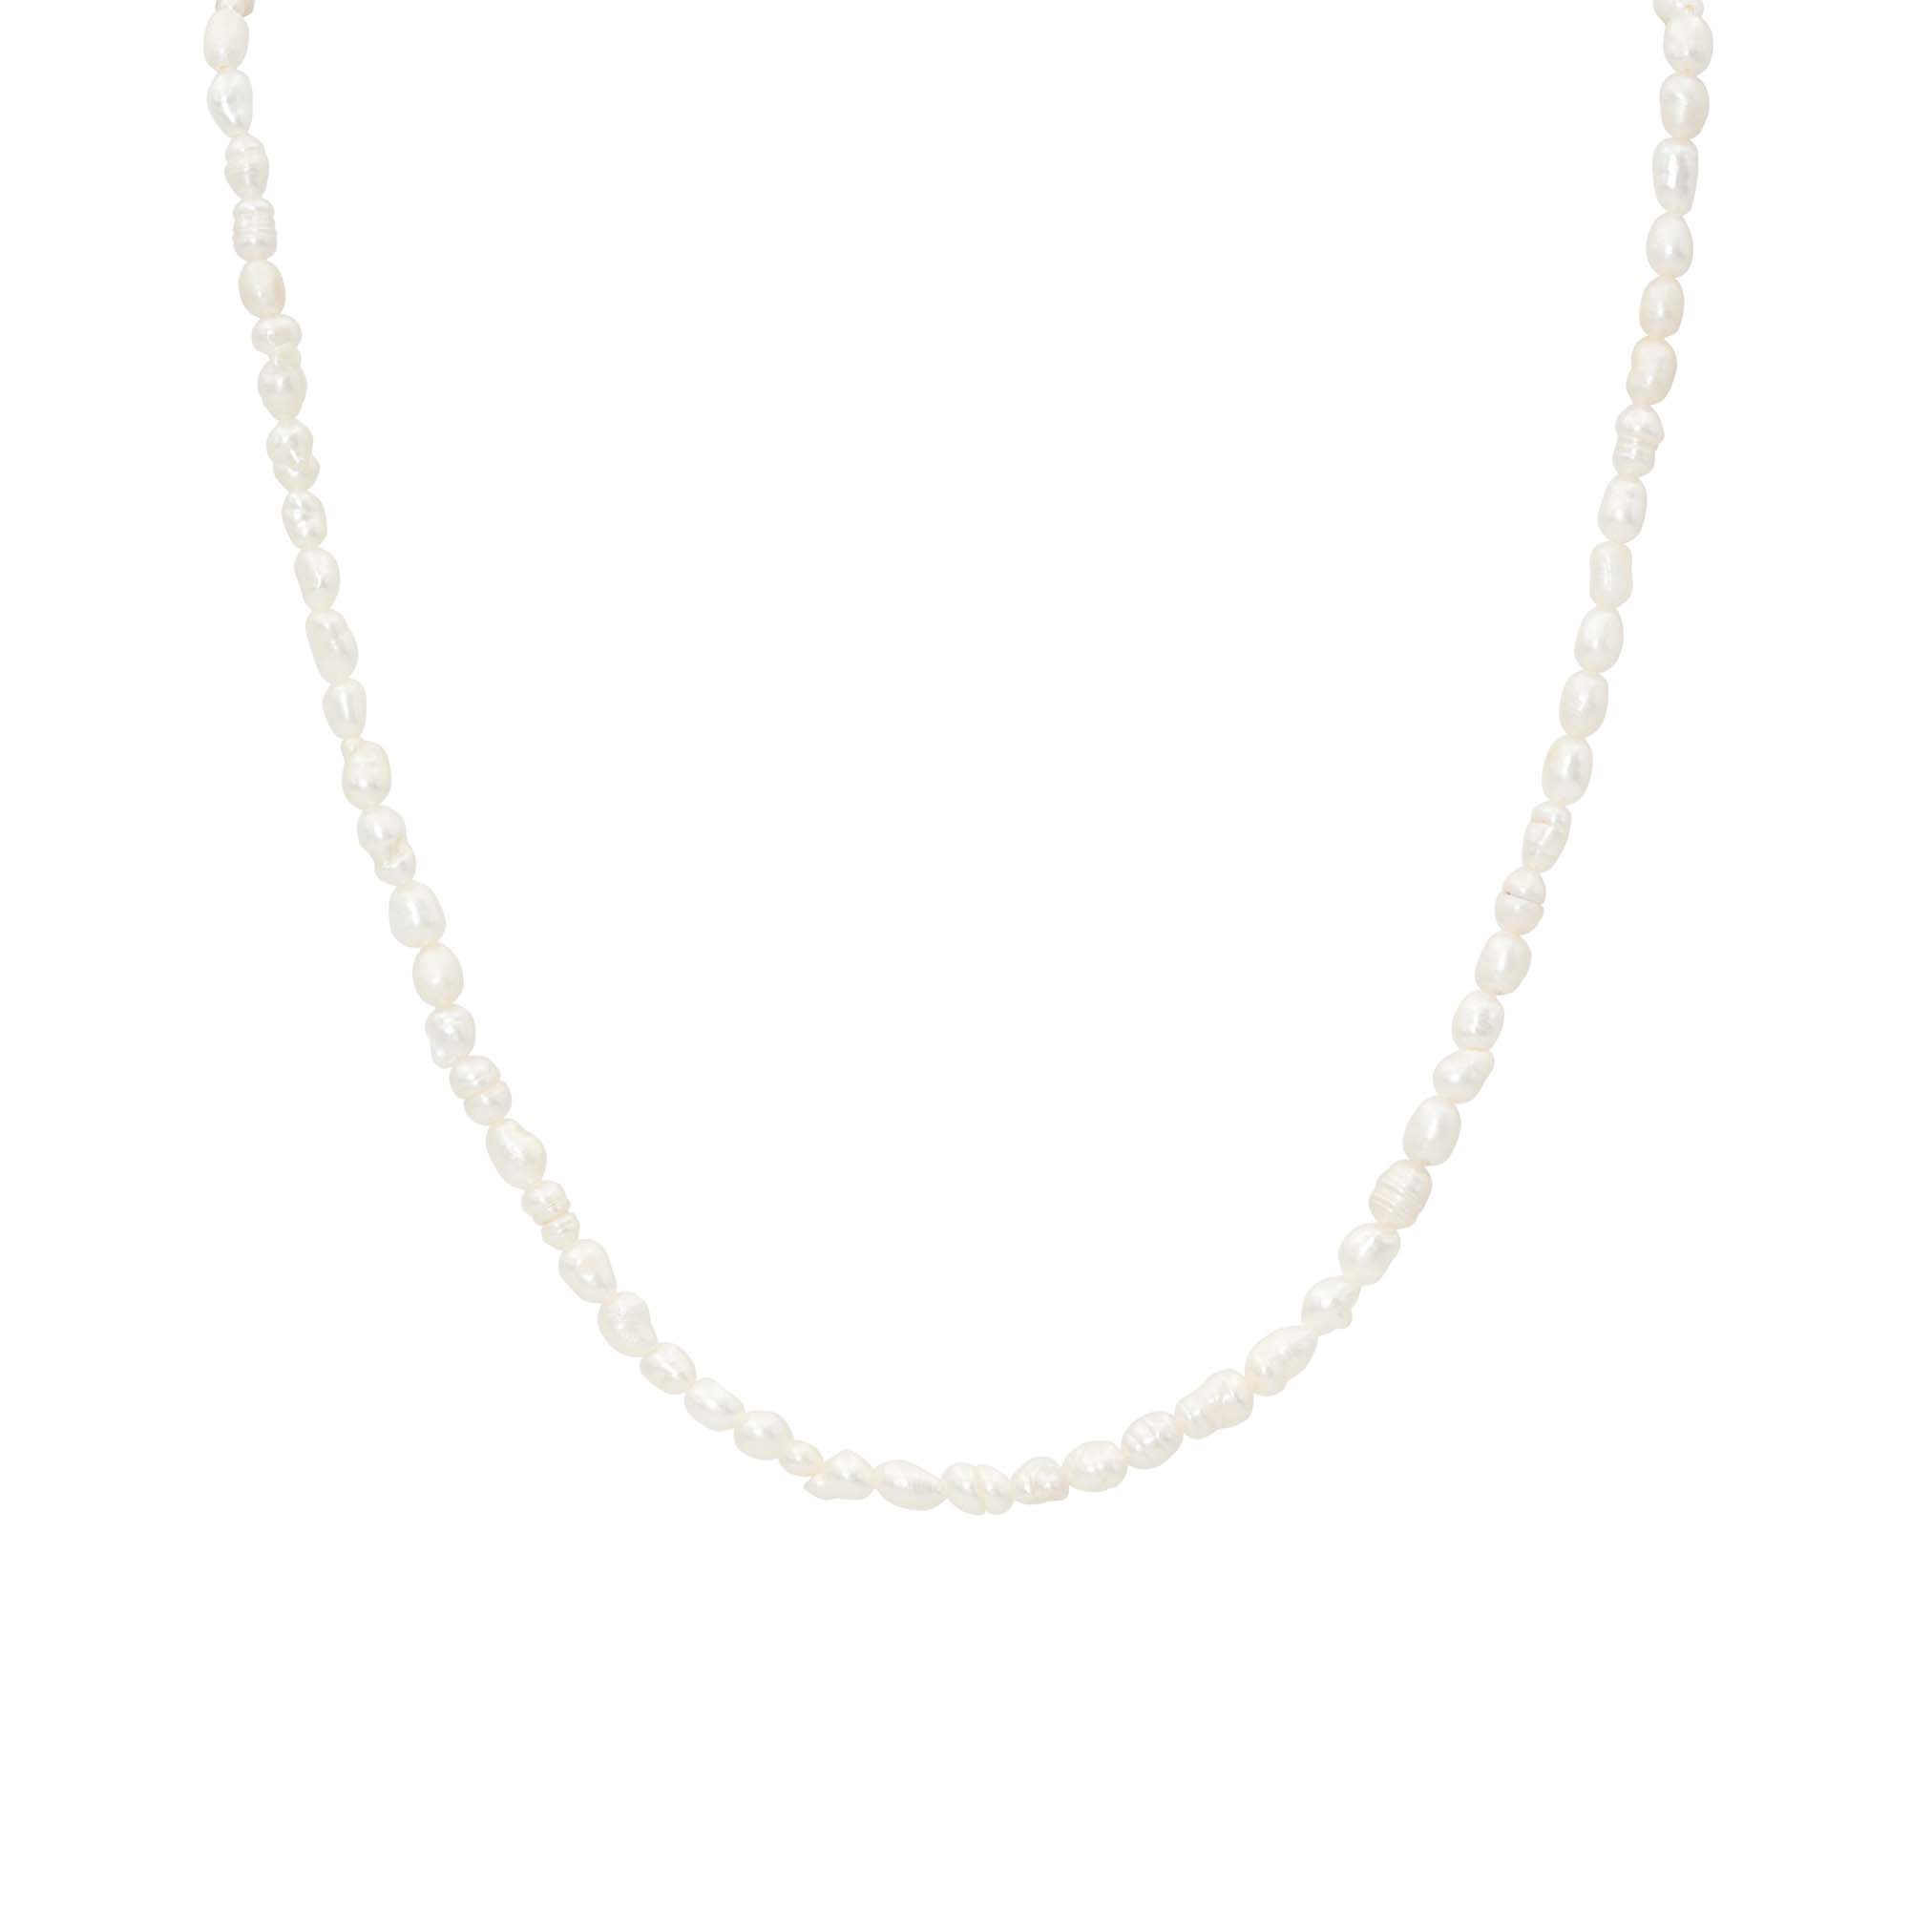 Freshwater Pearls Necklace - Narcissa